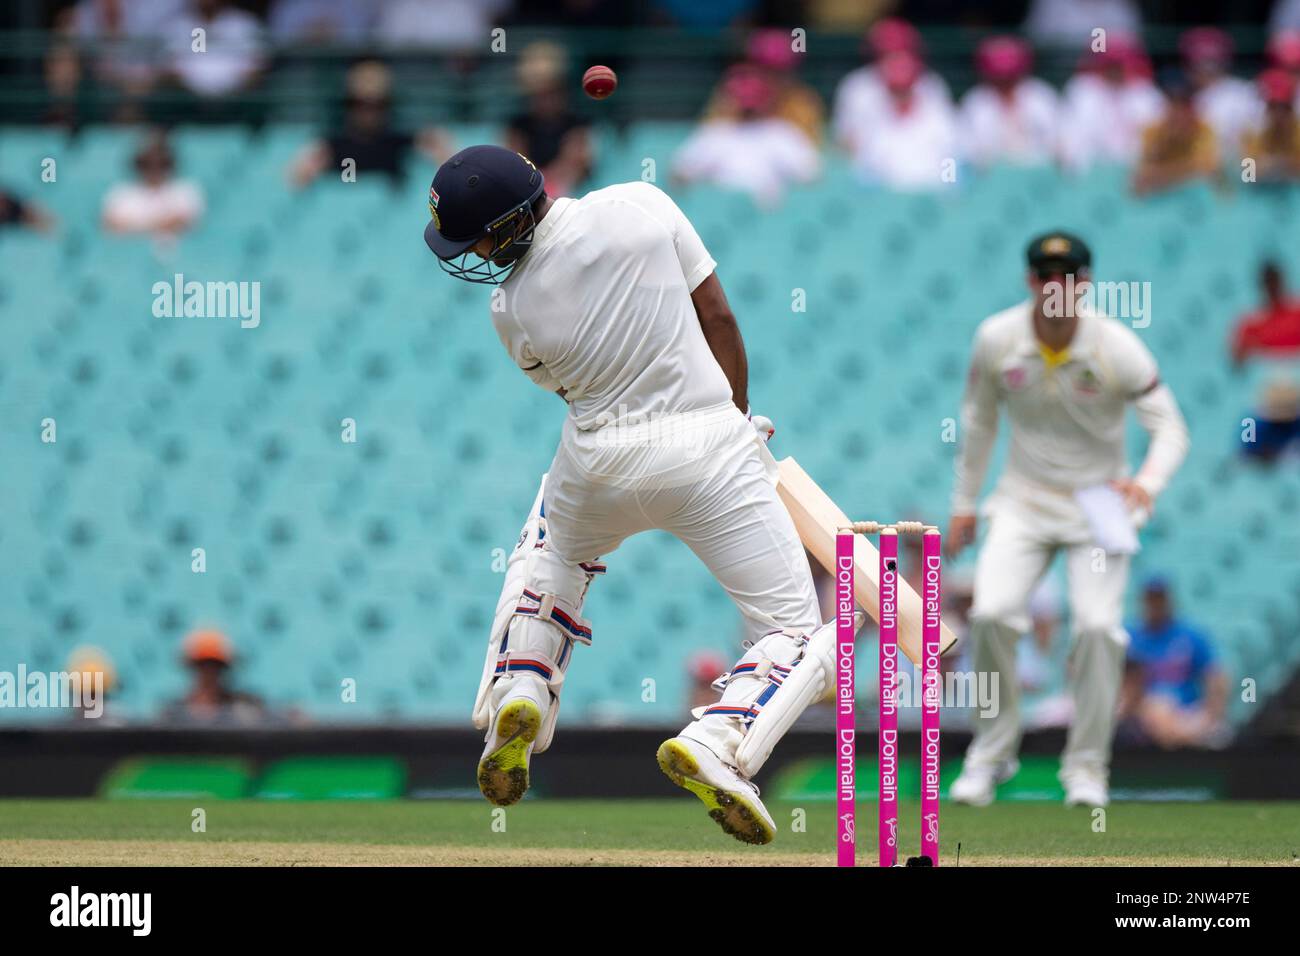 favorito el viento es fuerte Pato SYDNEY, AUSTRALIA - JANUARY 03: Indian player Mayank Agarwal gets a high  ball at the 4th Cricket Test Match between Australia and India at The  Sydney Cricket Ground in Sydney, Australia on